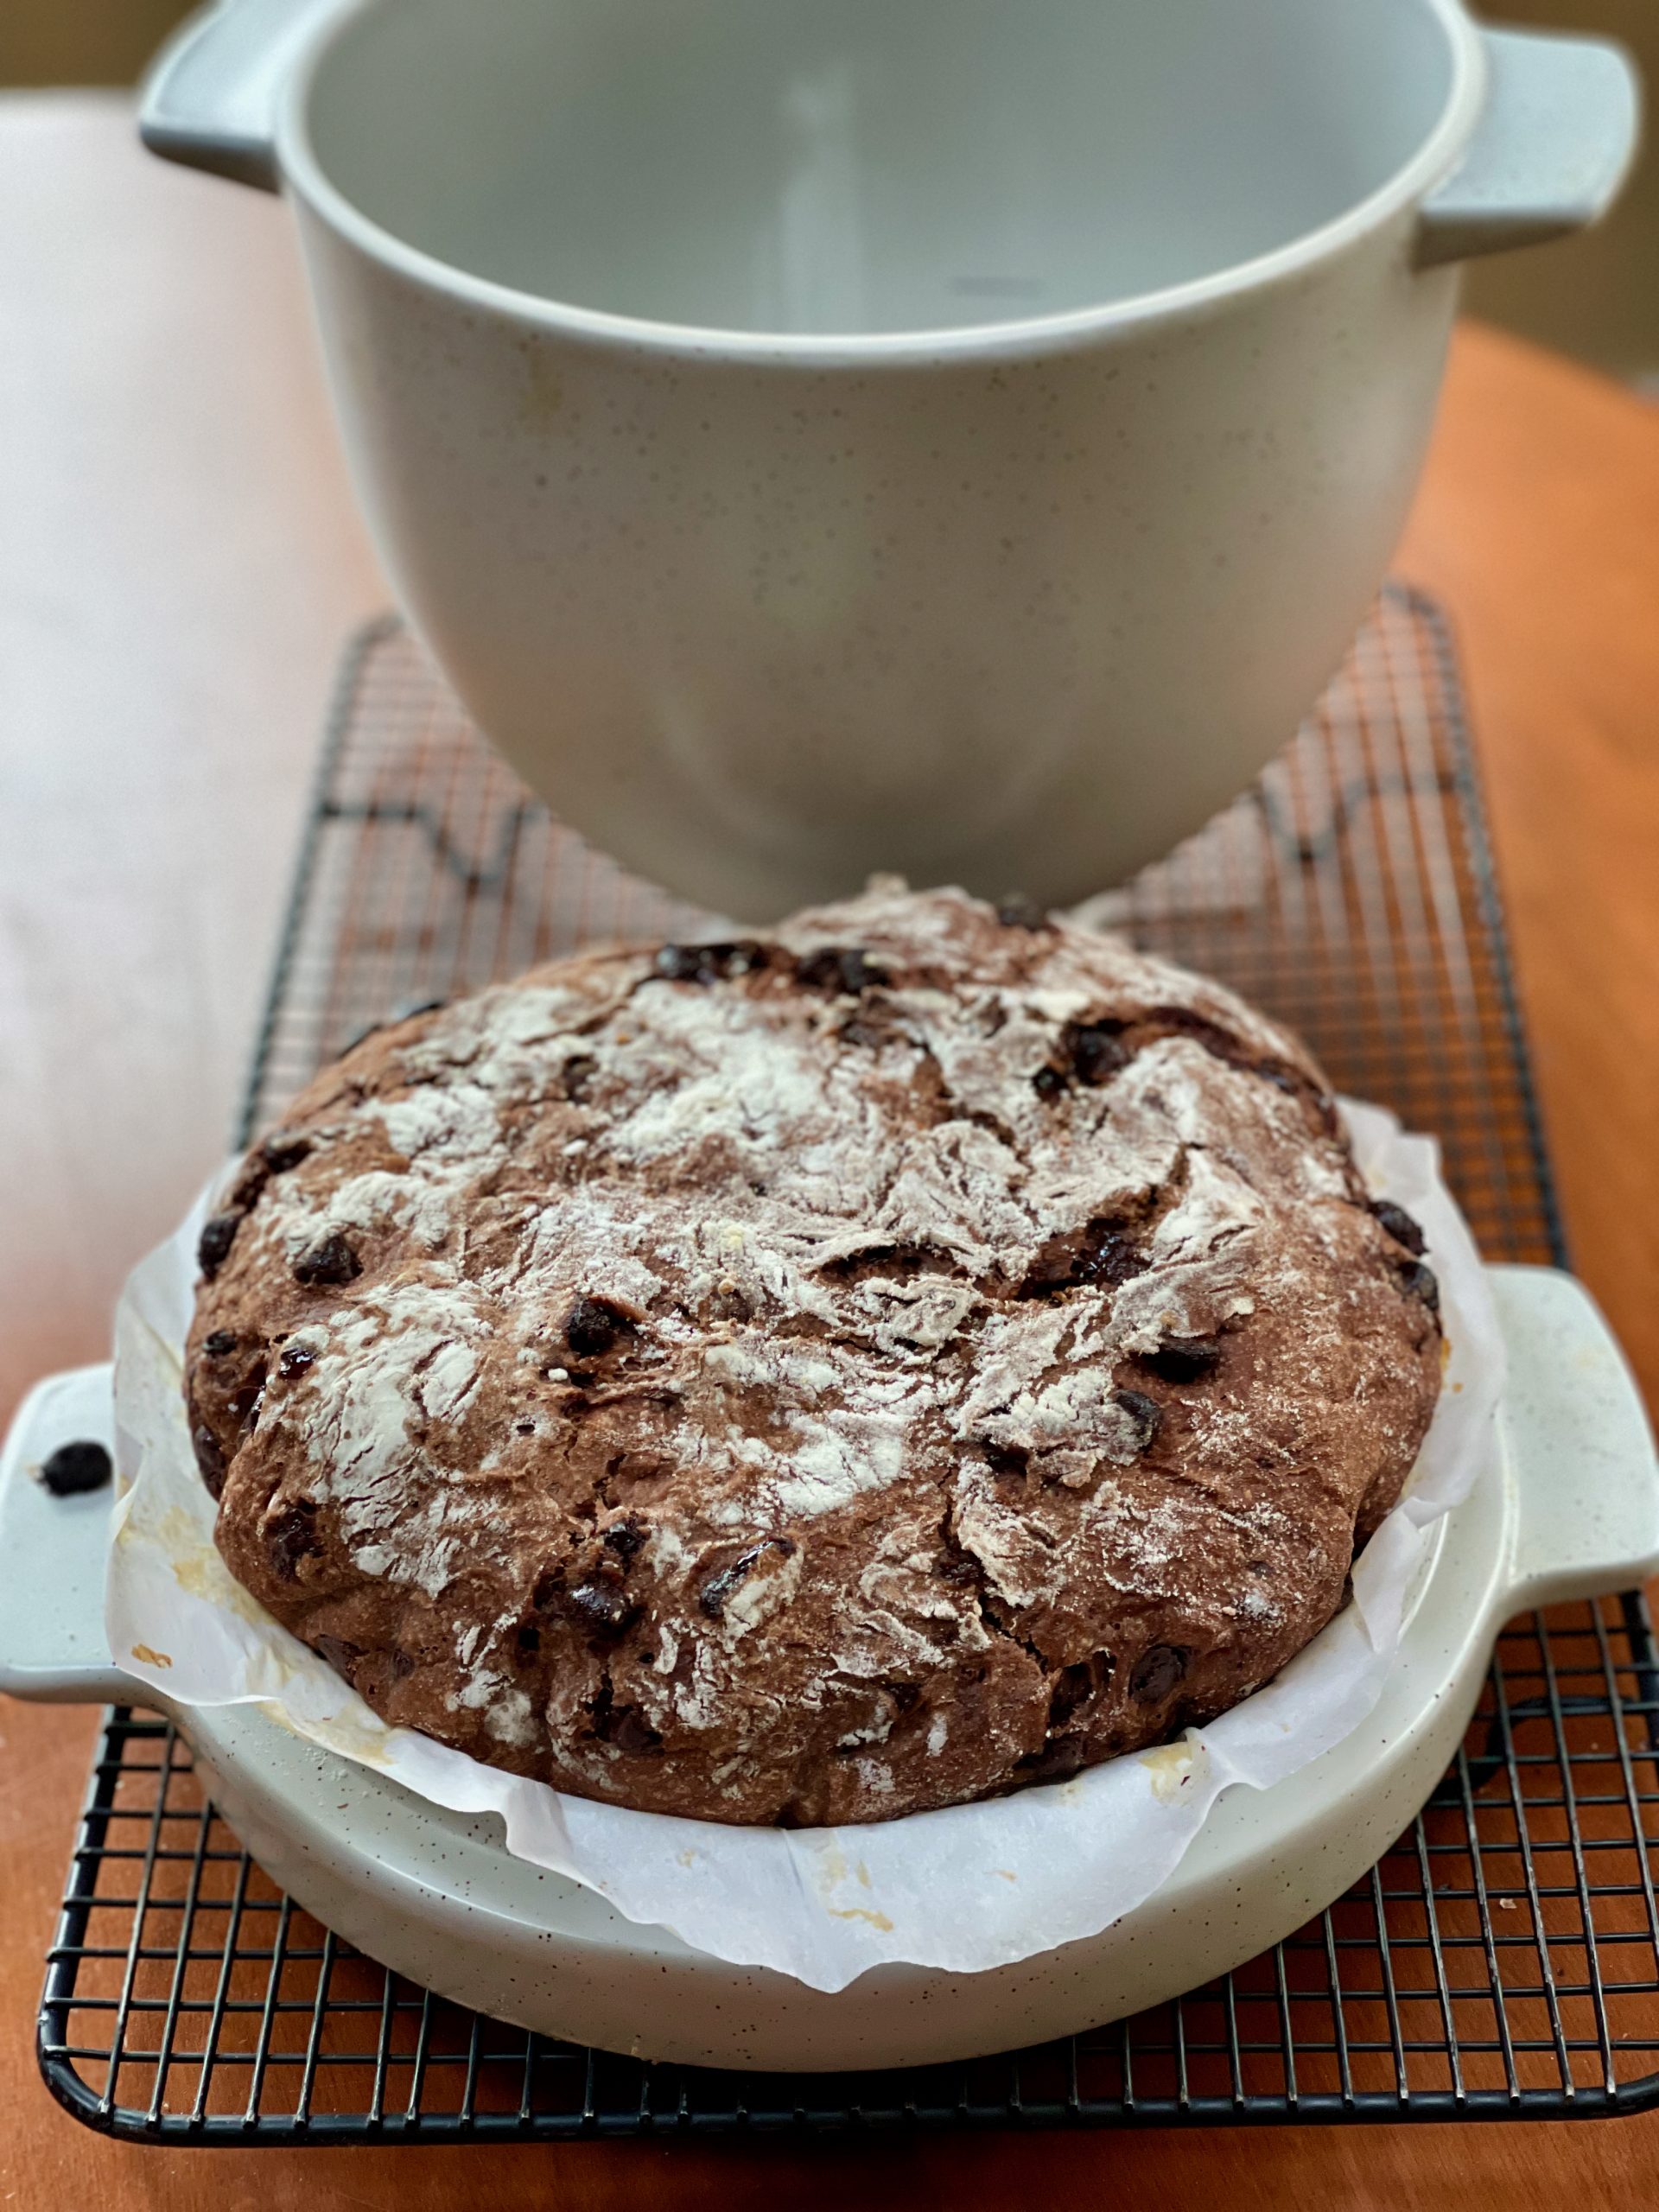 https://www.epicuricloud.com/wp-content/uploads/2021/12/KitchenAid-Bread-Bowl-Chocolate-Cherry-Rye-Bread-scaled.jpeg